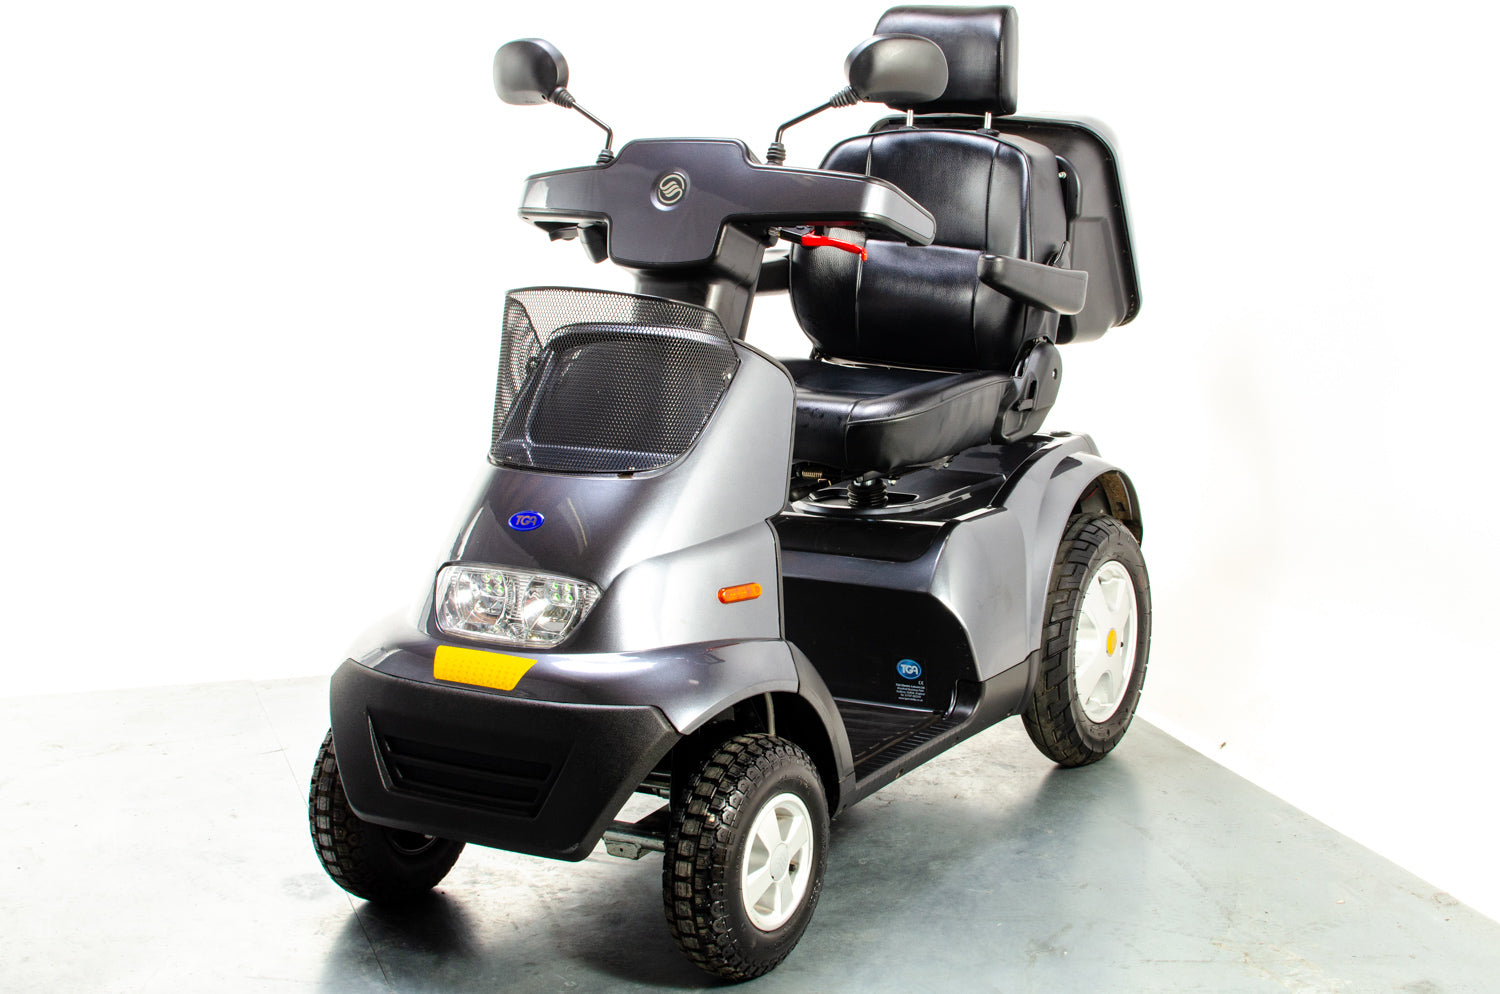 TGA Breeze S4 Used Mobility Scooter 8mph Large All-Terrain Road Legal Off-Road Grey